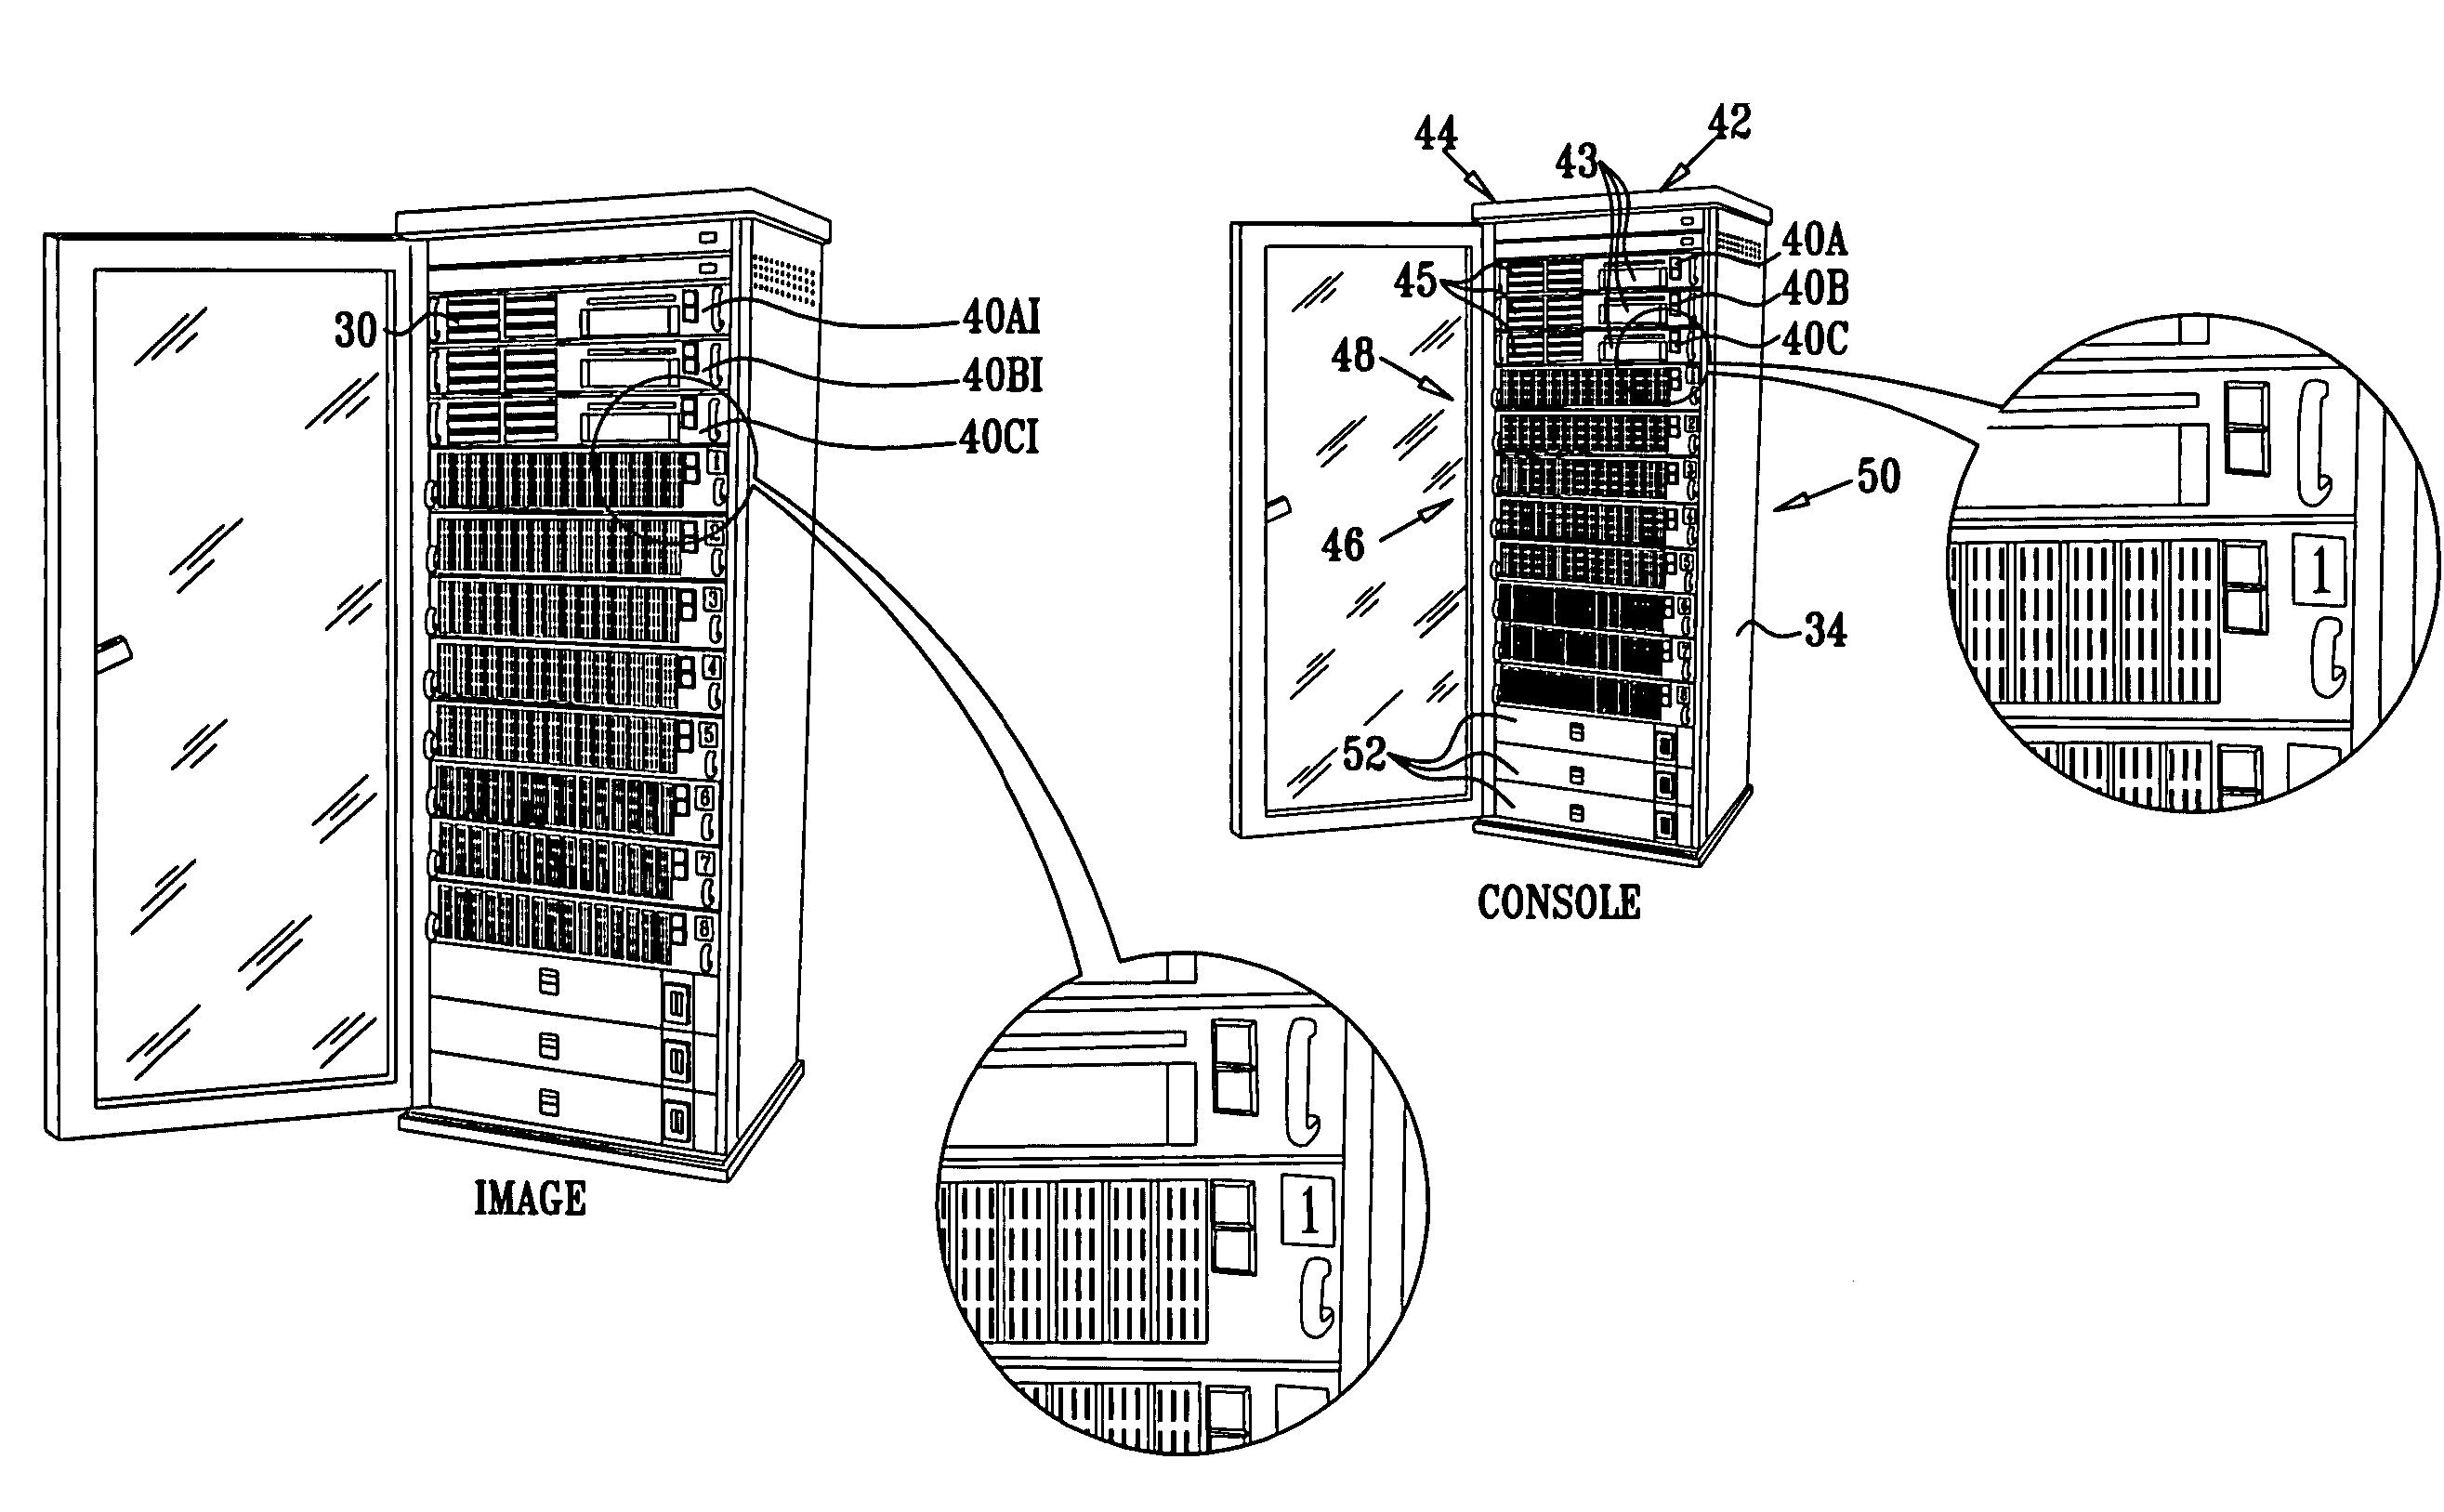 Graphic user interface for a storage system